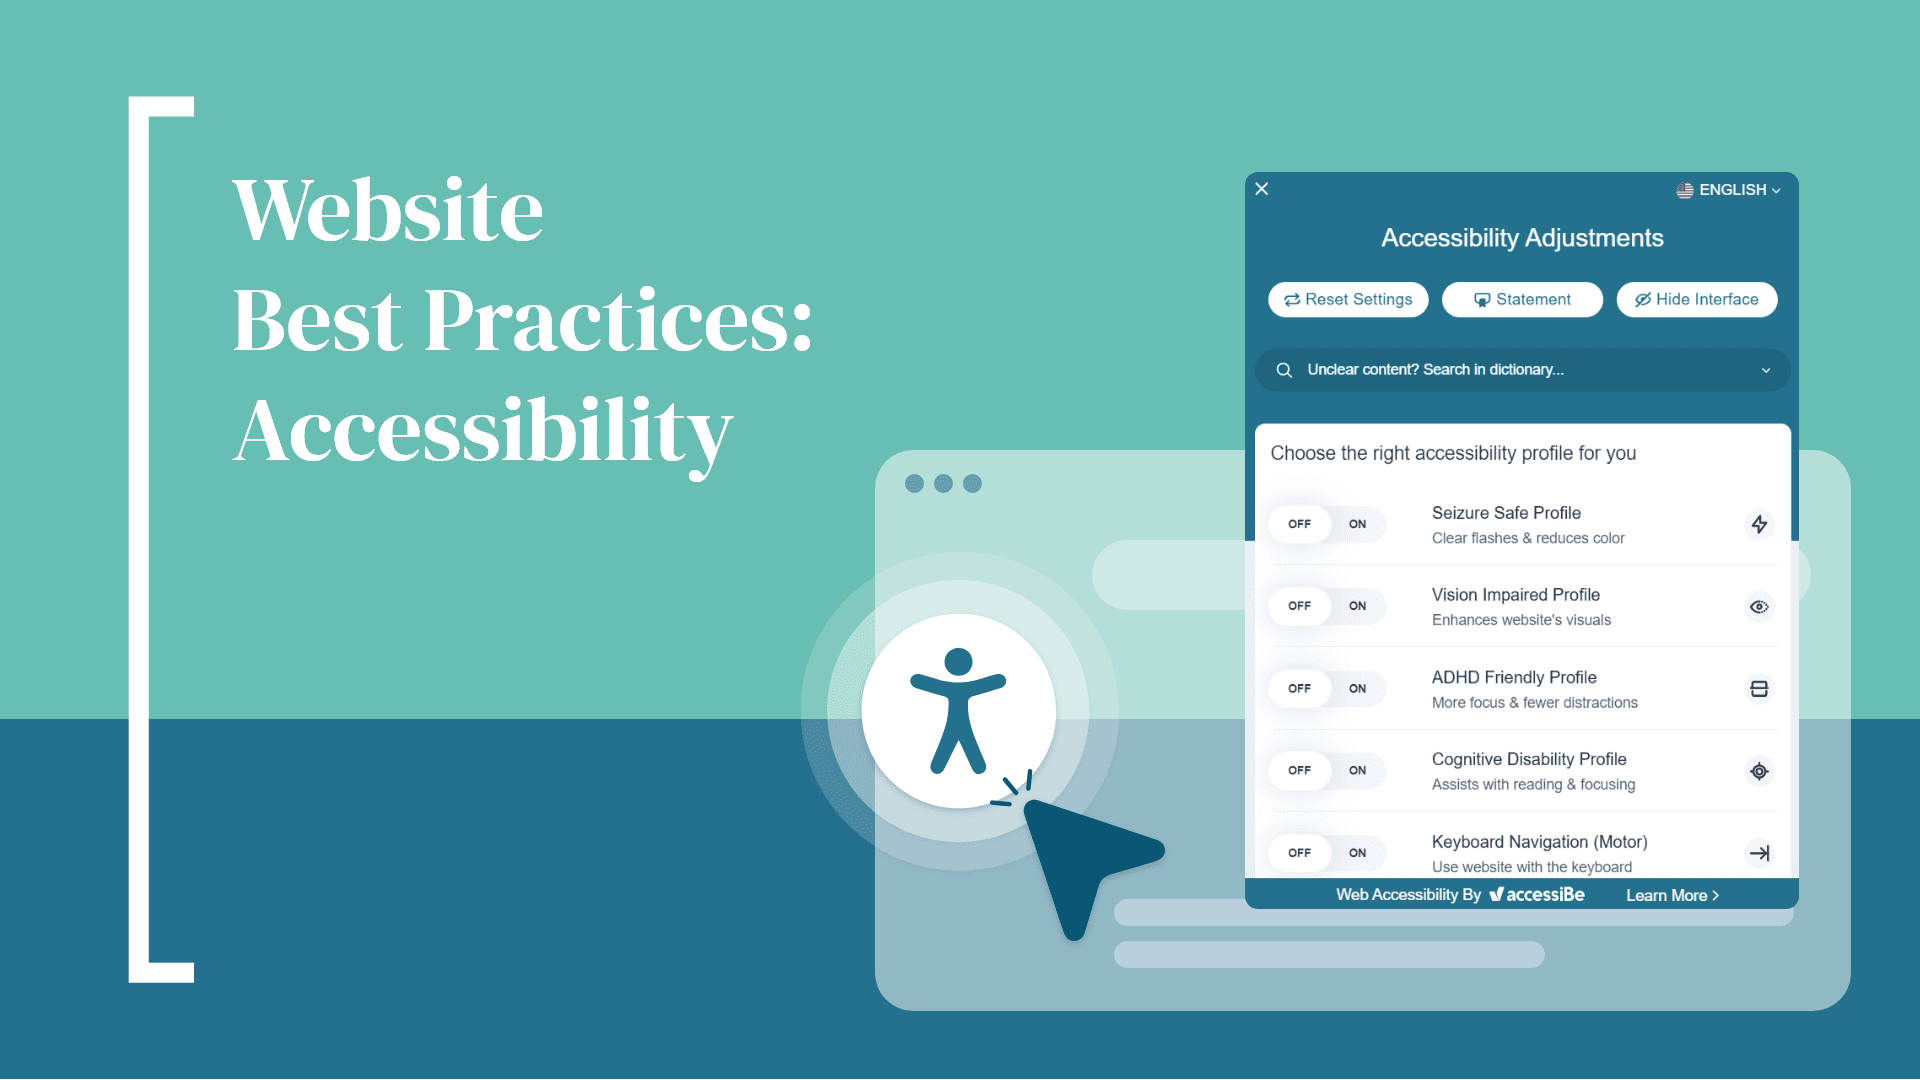 Website Best Practices: Accessibility